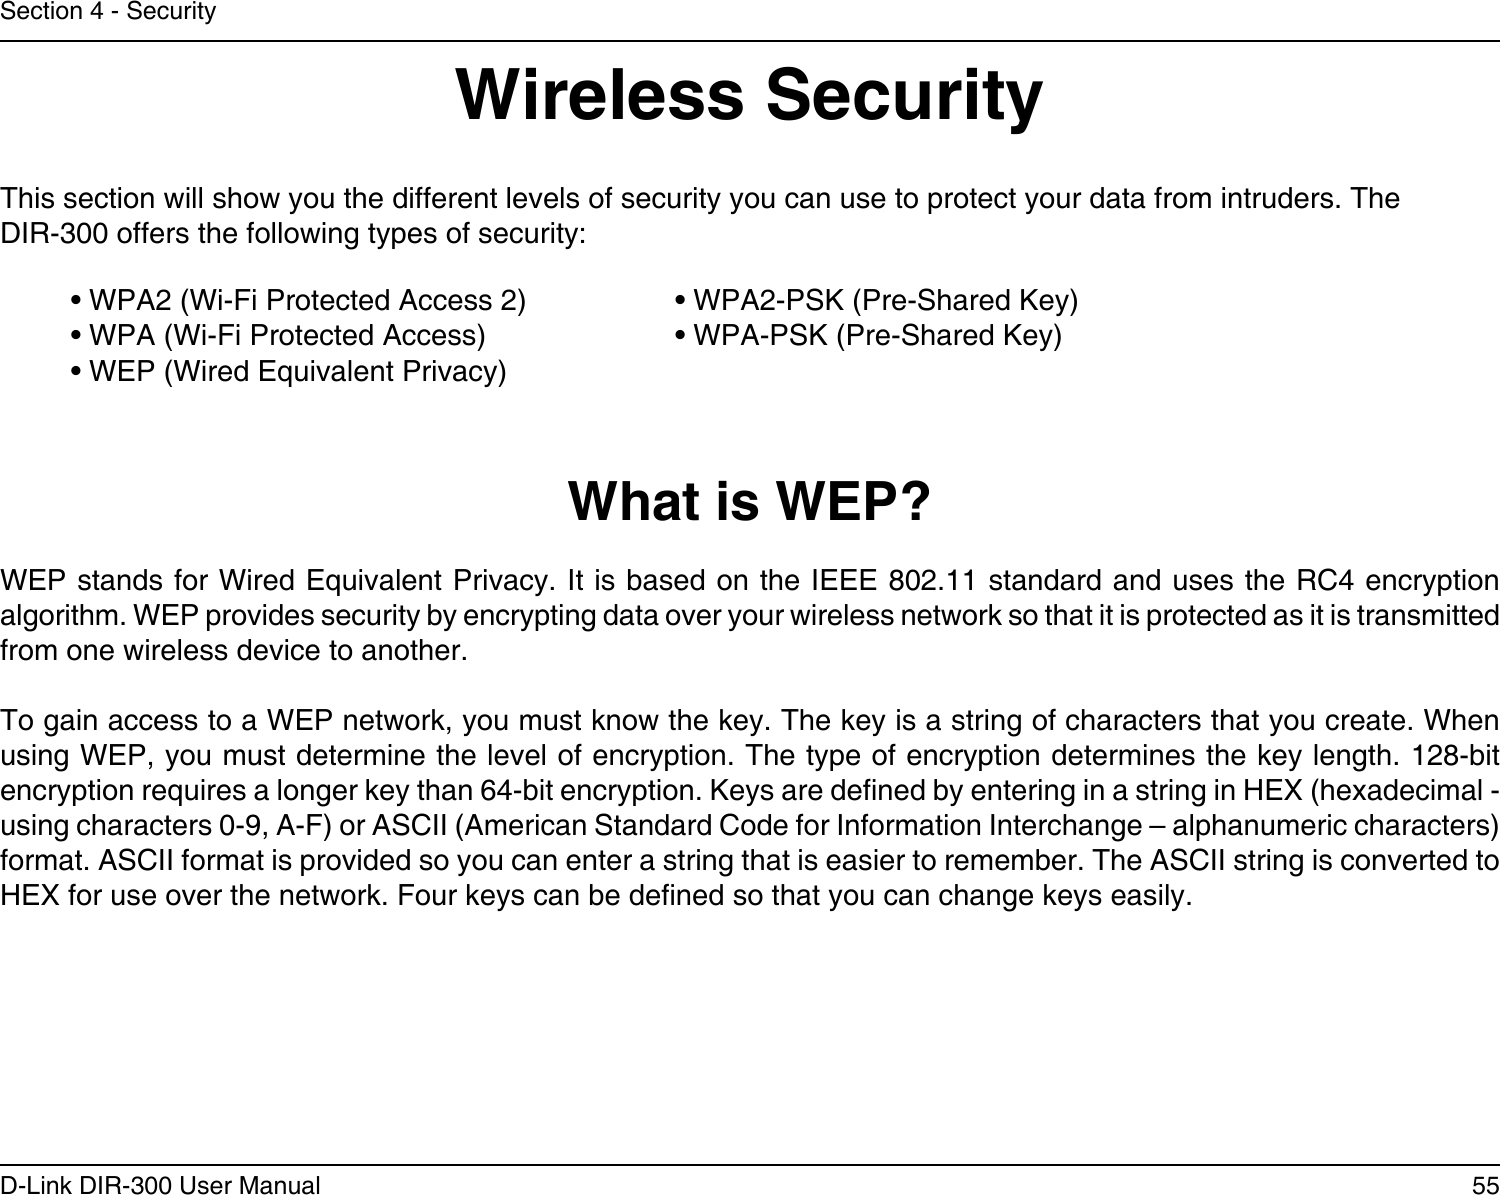 55D-Link DIR-300 User ManualSection 4 - SecurityWireless SecurityThis section will show you the different levels of security you can use to protect your data from intruders. The DIR-300 offers the following types of security:• WPA2 (Wi-Fi Protected Access 2)     • WPA2-PSK (Pre-Shared Key)• WPA (Wi-Fi Protected Access)      • WPA-PSK (Pre-Shared Key)• WEP (Wired Equivalent Privacy)What is WEP?WEP stands for Wired Equivalent Privacy. It is based on the IEEE 802.11 standard and uses the RC4 encryption algorithm. WEP provides security by encrypting data over your wireless network so that it is protected as it is transmitted from one wireless device to another.To gain access to a WEP network, you must know the key. The key is a string of characters that you create. When using WEP, you must determine the level of encryption. The type of encryption determines the key length. 128-bit encryption requires a longer key than 64-bit encryption. Keys are dened by entering in a string in HEX (hexadecimal - using characters 0-9, A-F) or ASCII (American Standard Code for Information Interchange – alphanumeric characters) format. ASCII format is provided so you can enter a string that is easier to remember. The ASCII string is converted to HEX for use over the network. Four keys can be dened so that you can change keys easily.